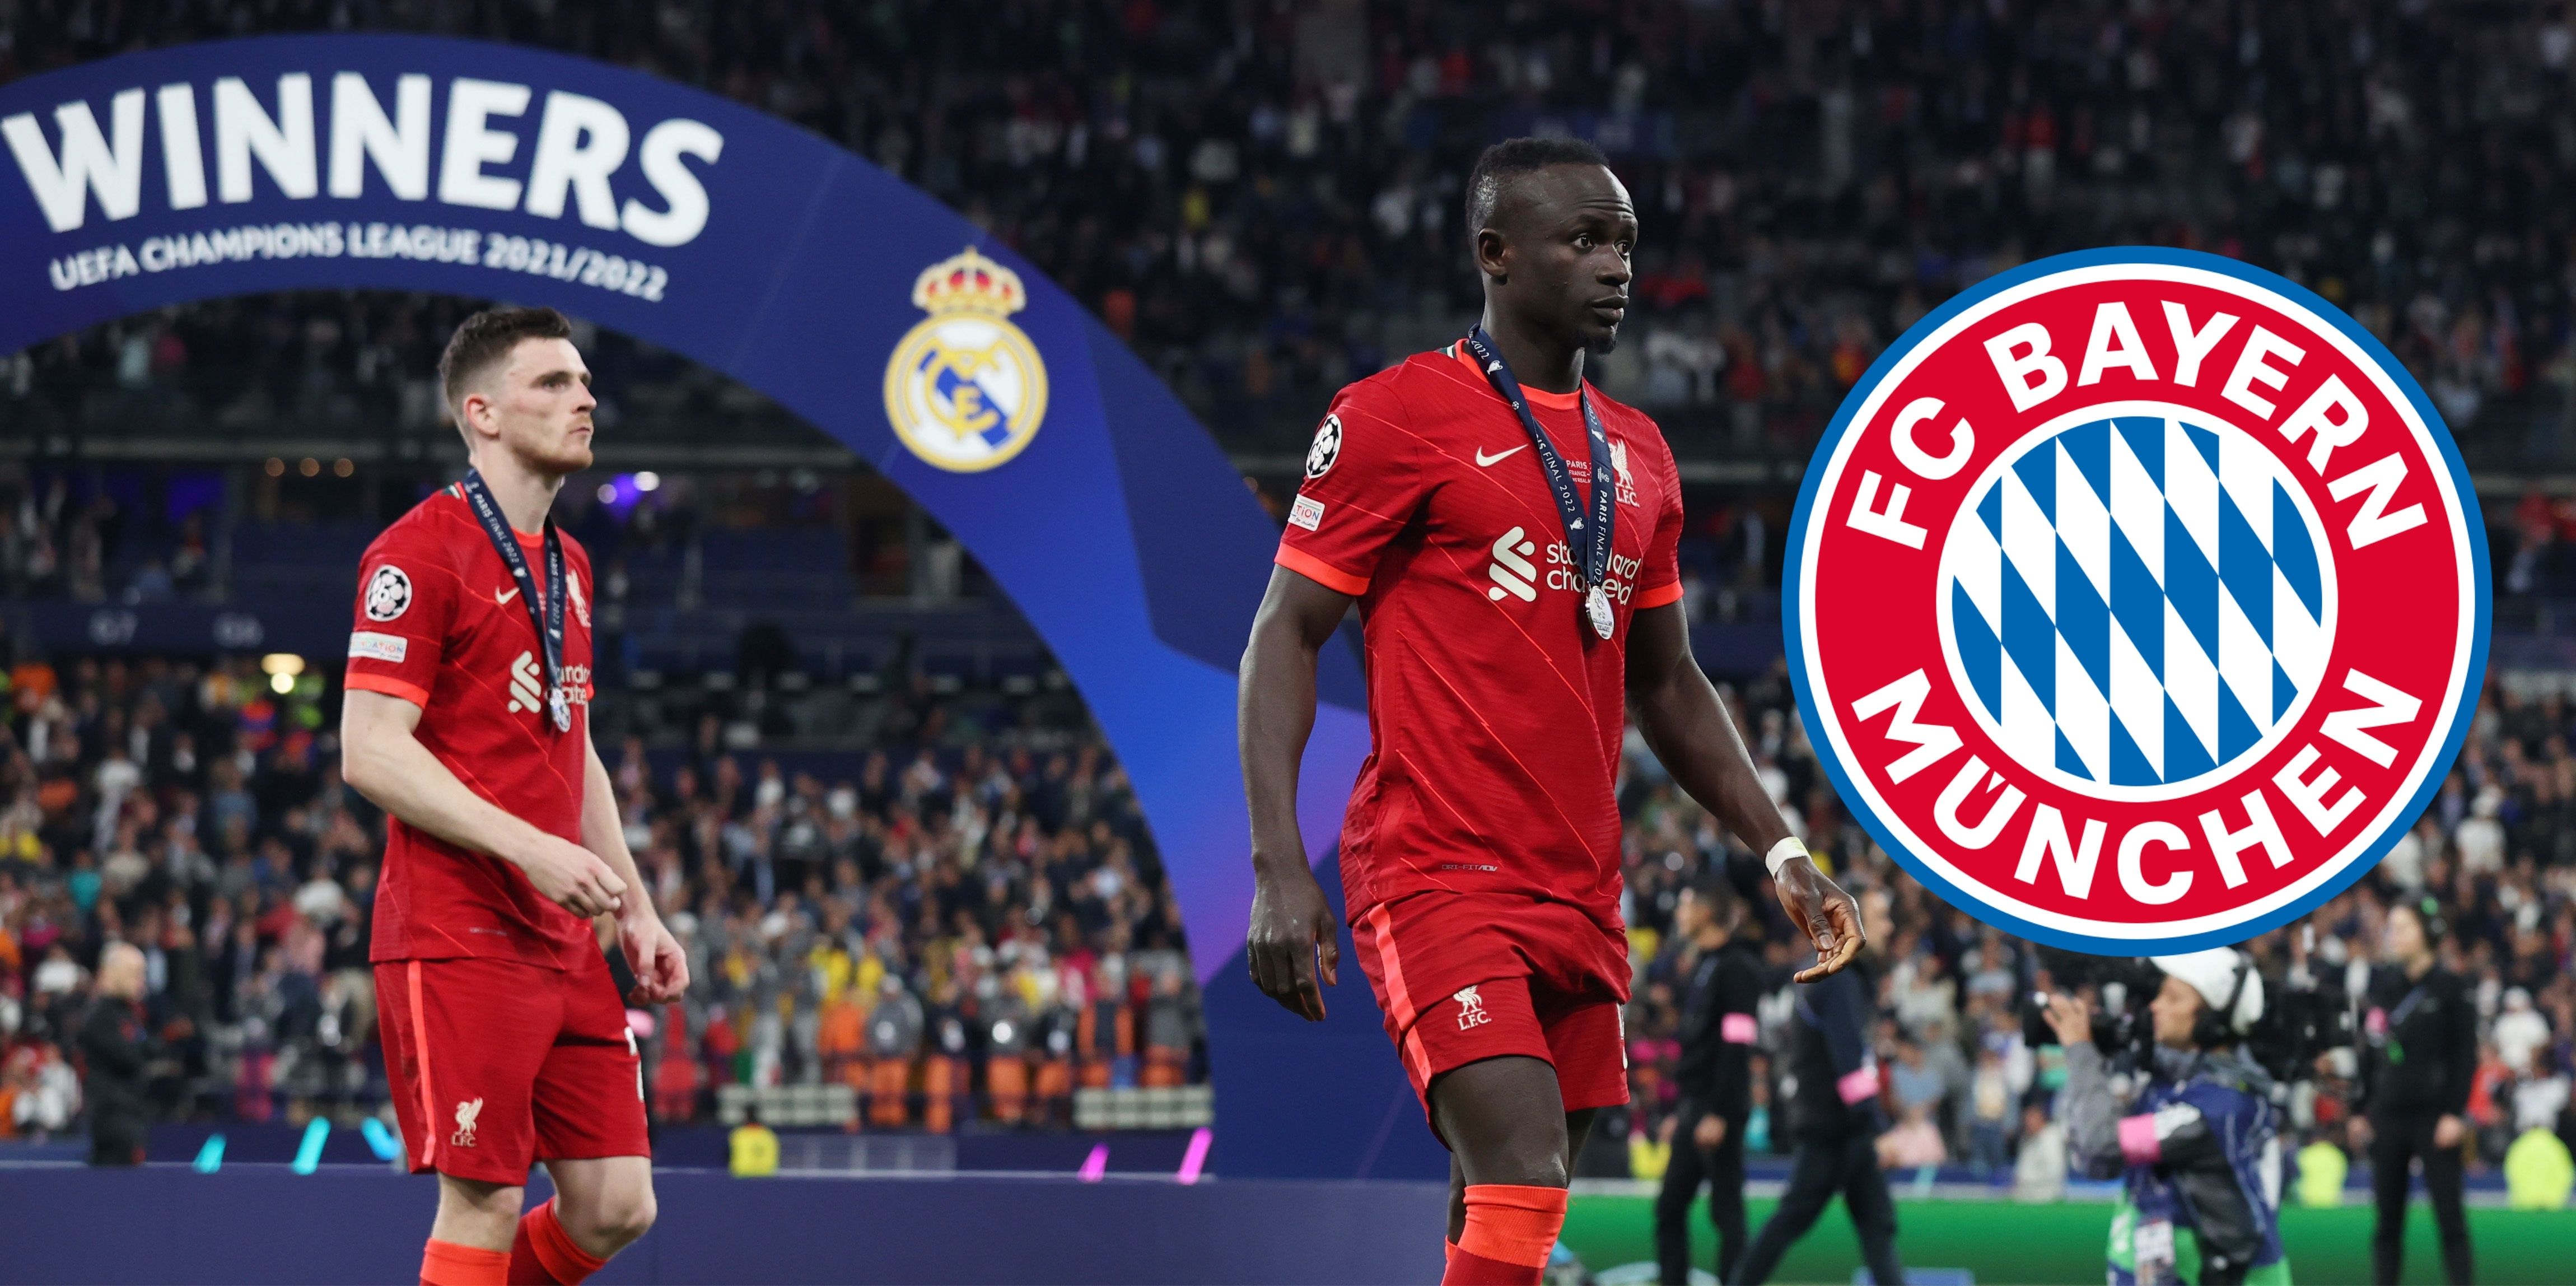 ‘Sadio Mane has decided to leave Liverpool’ – Fabrizio Romano drops transfer bombshell after CL final defeat